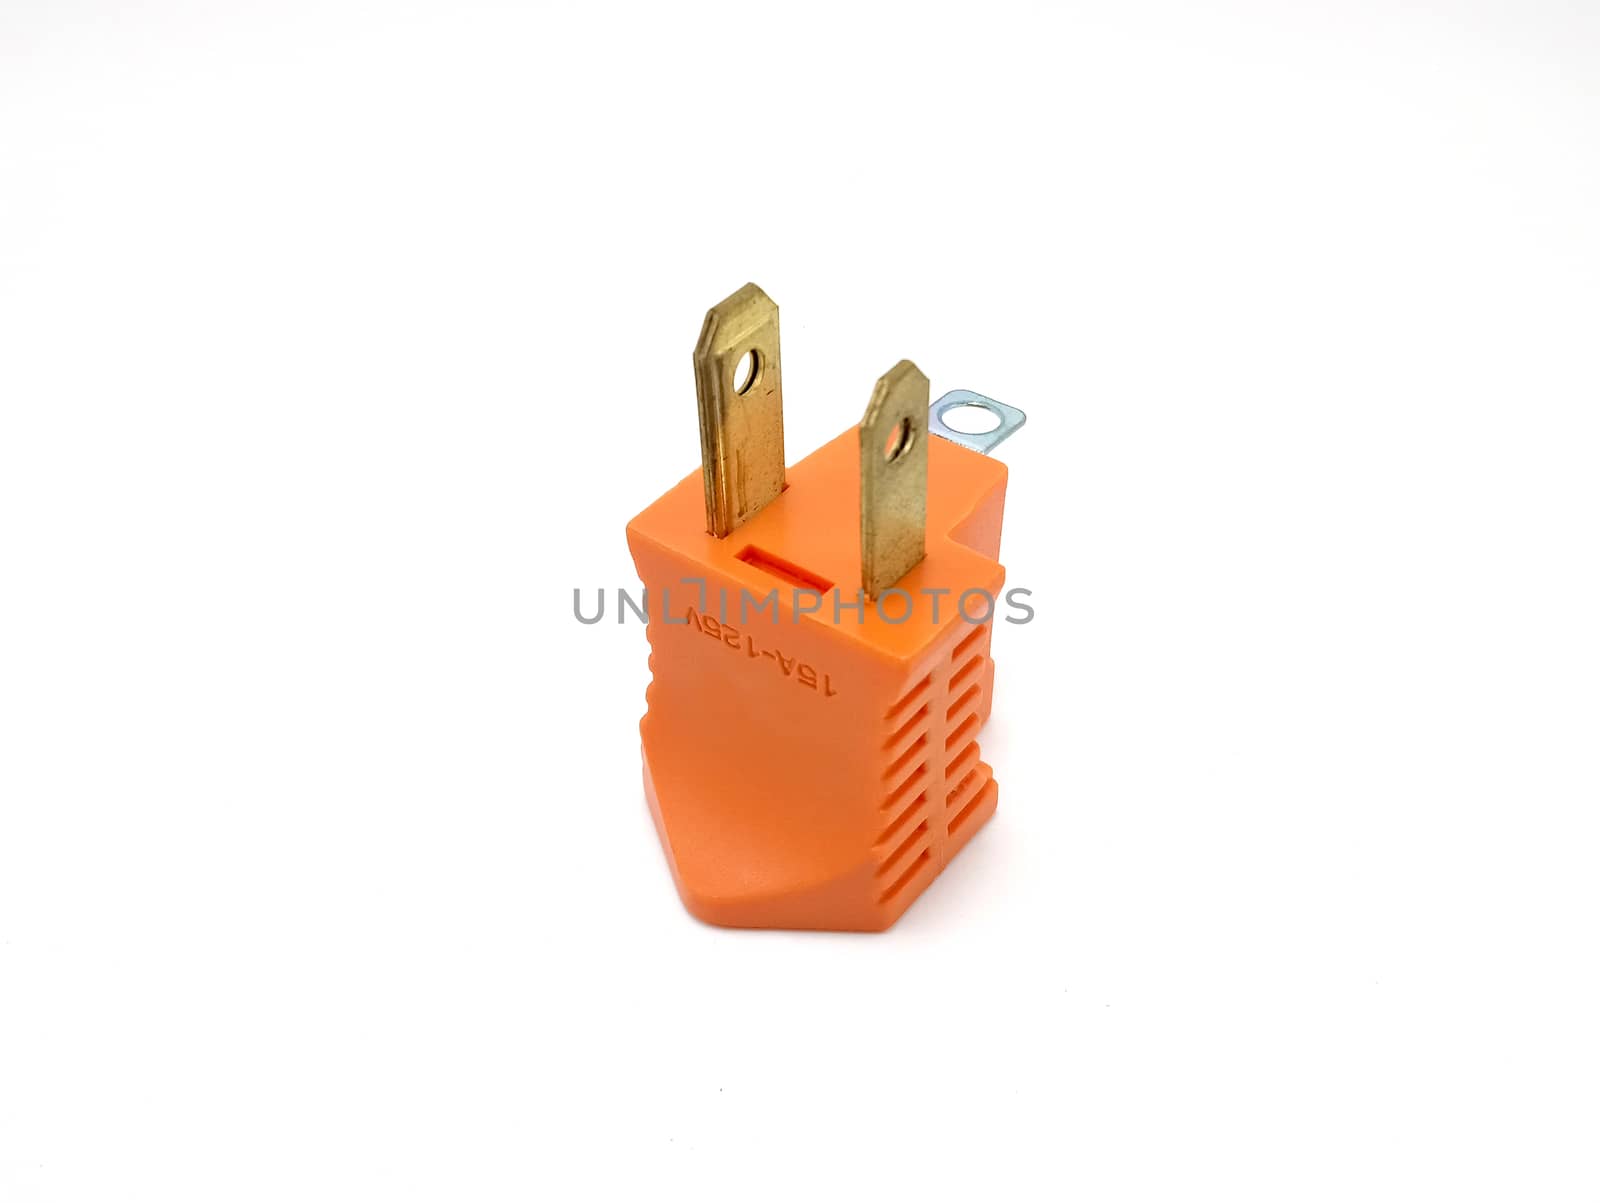 Orange two prong electrical plug to insert on outlet